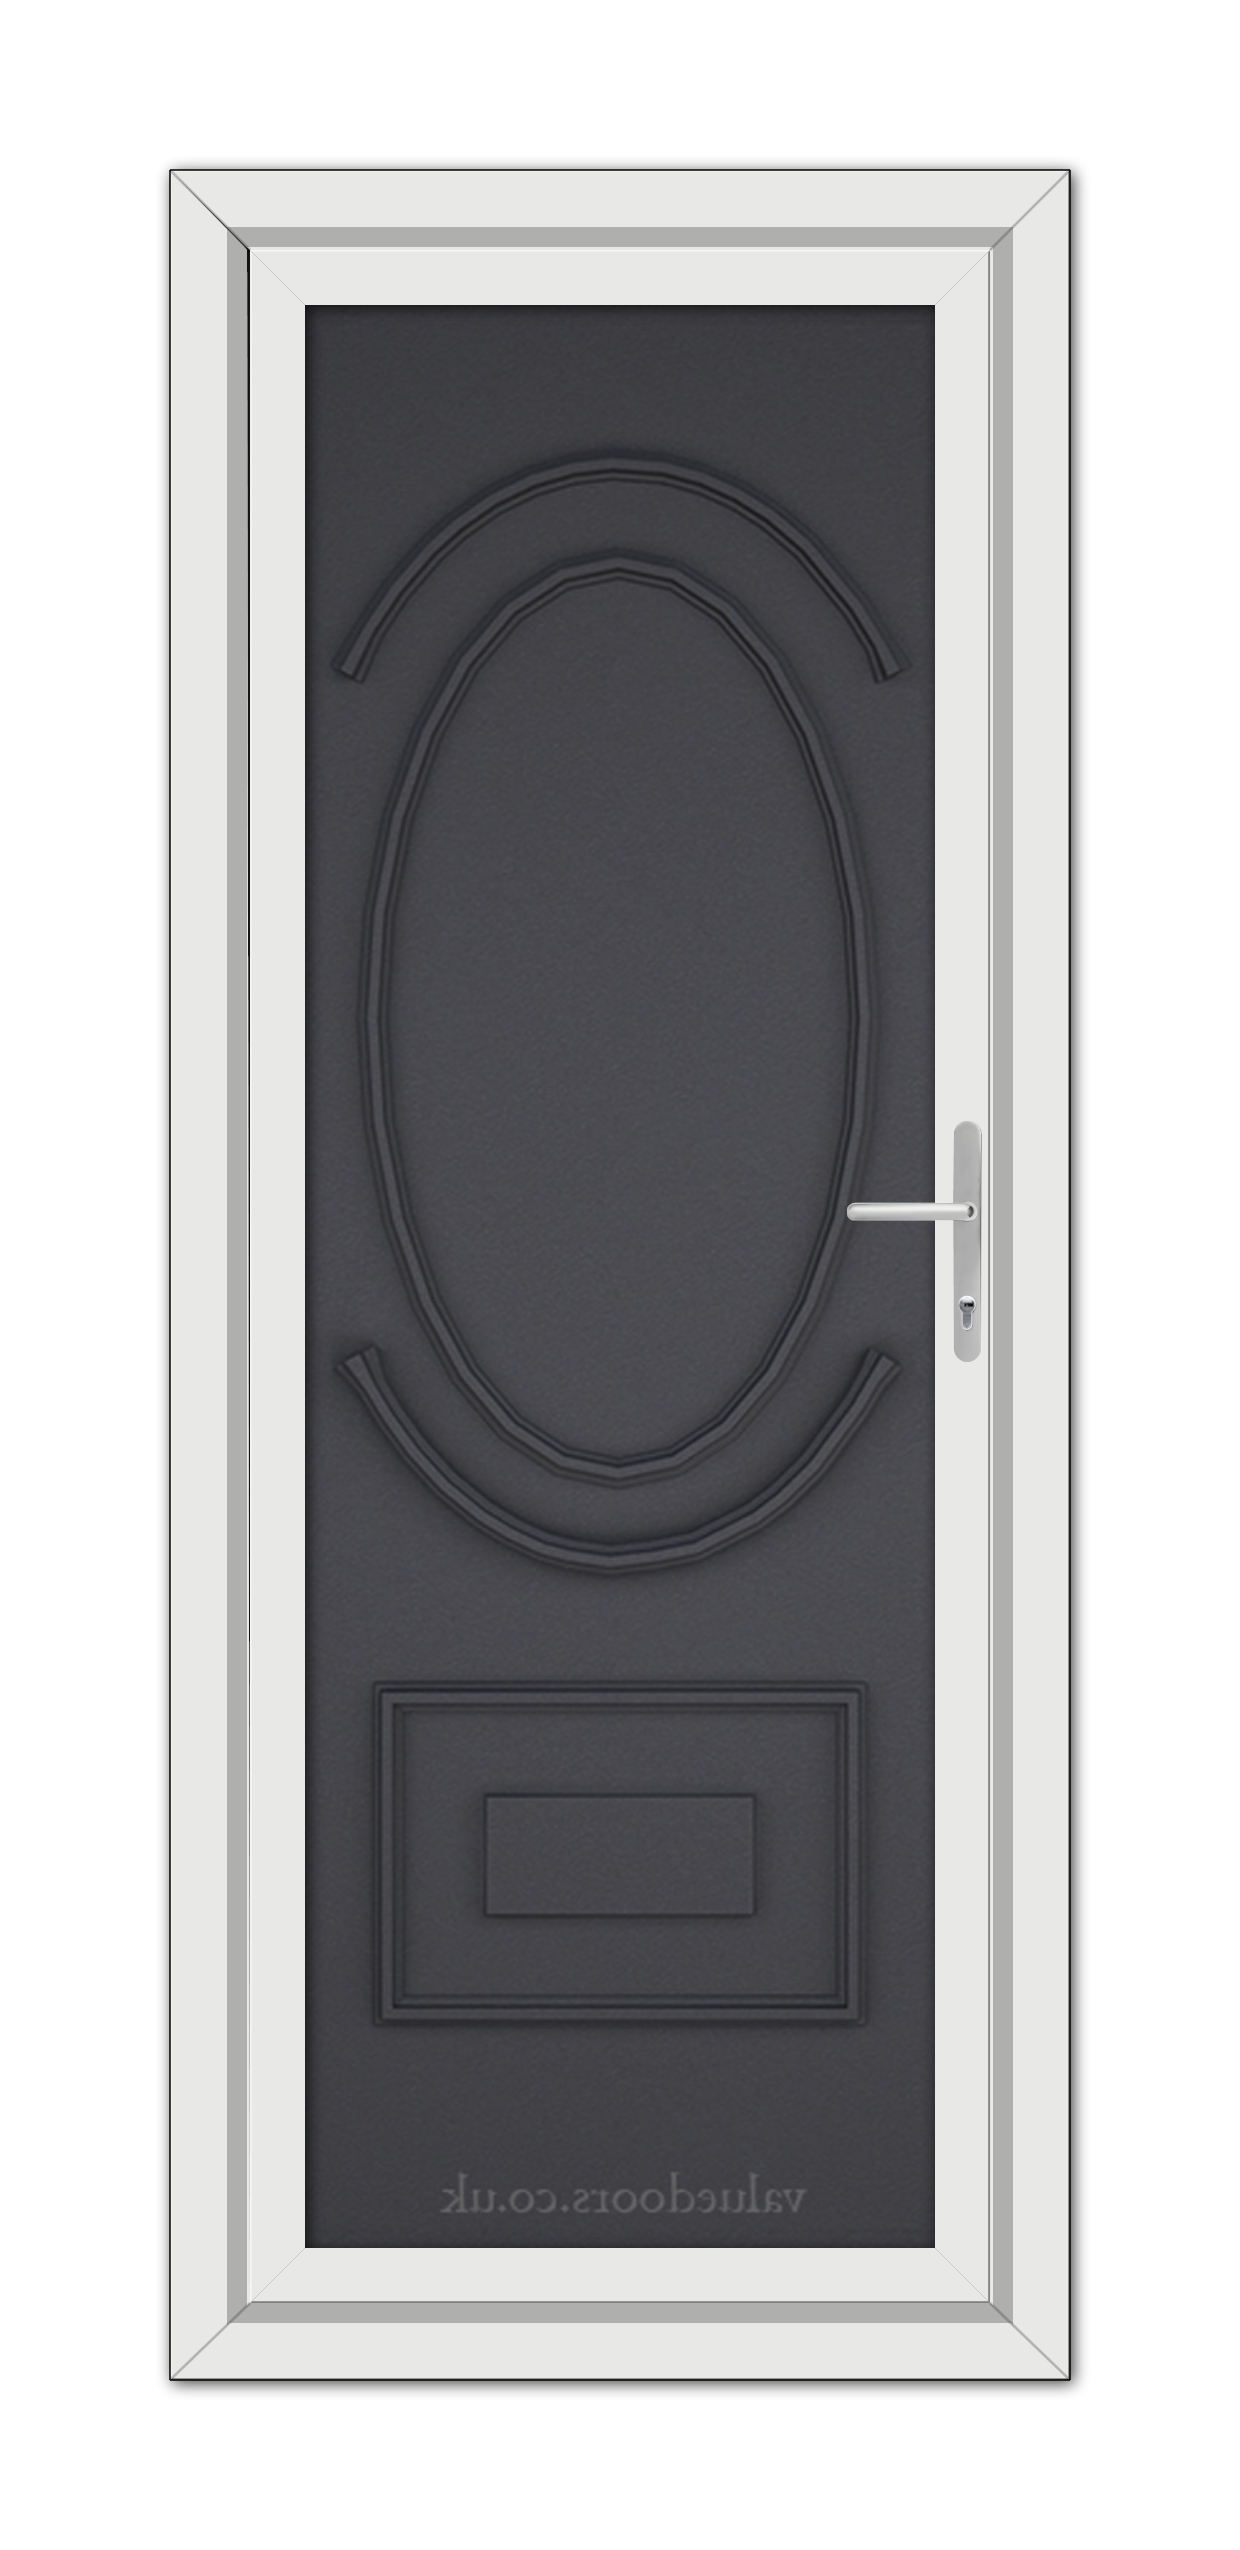 A modern, Grey Grained Richmond Solid uPVC door featuring an oval glass panel at the top, and a metallic handle on the right side, framed in white.